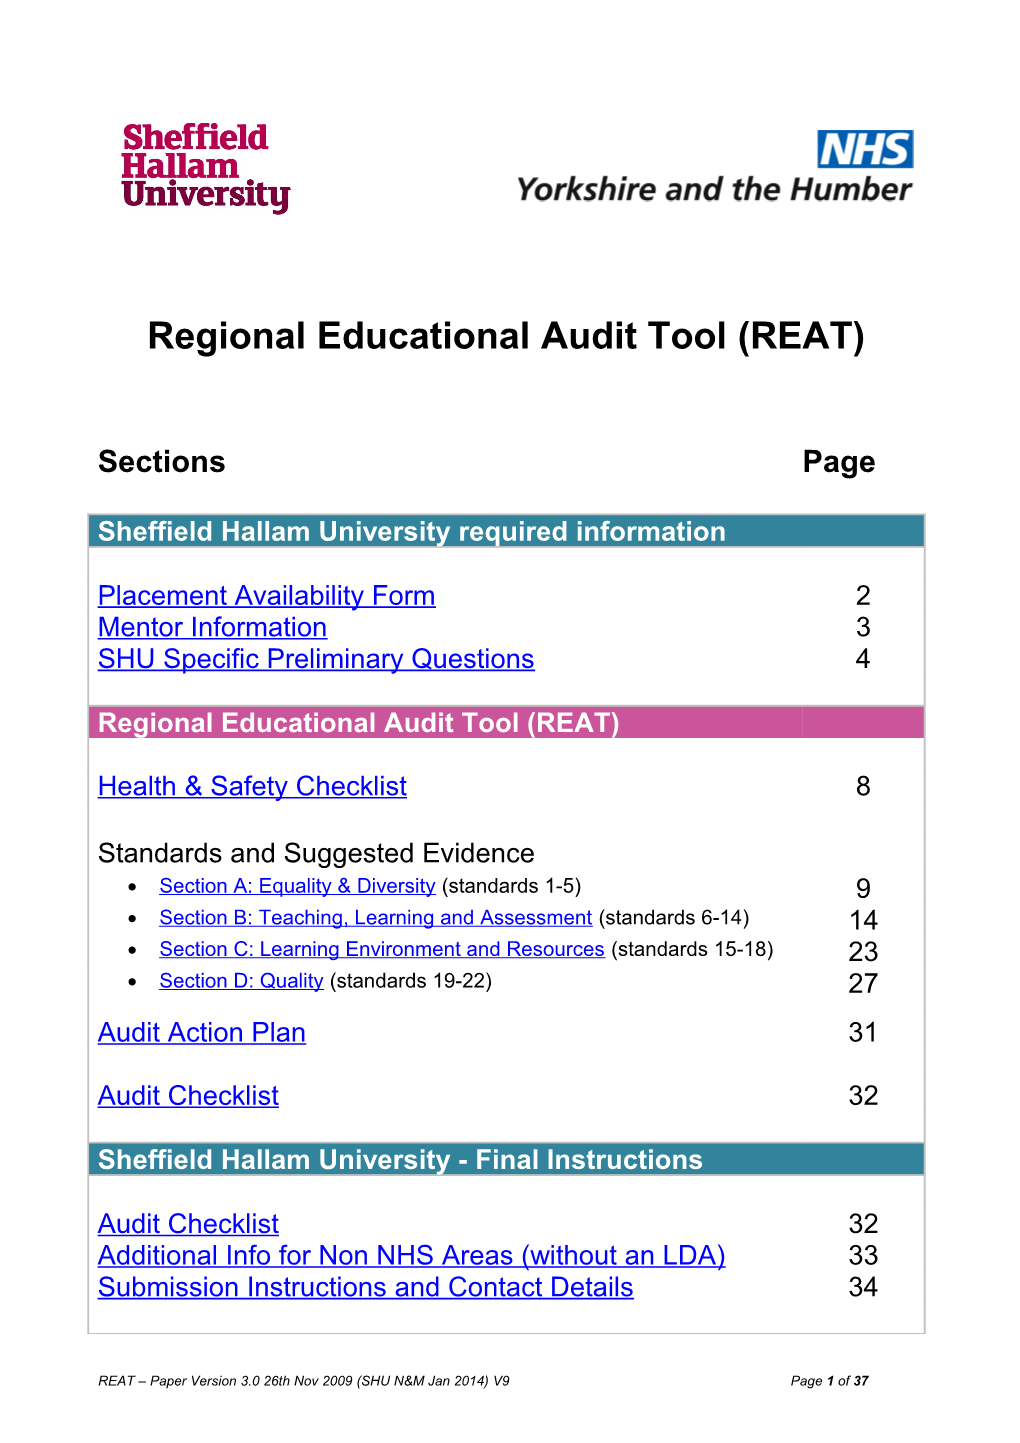 Yorkshire and the Humber Regional Educational Audit Tool and Process